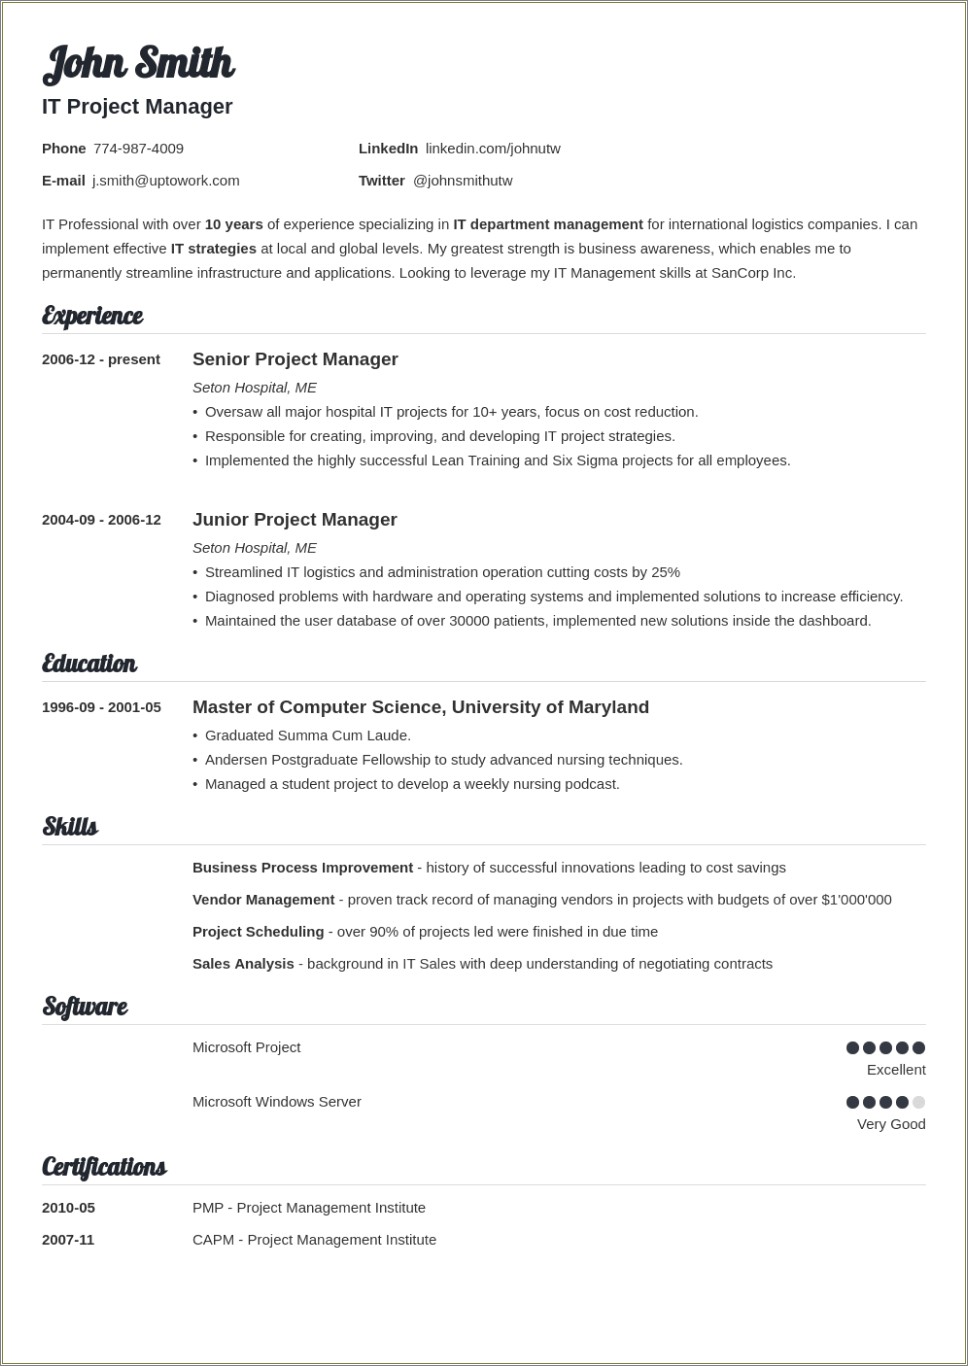 Resume Outline Example For A Job